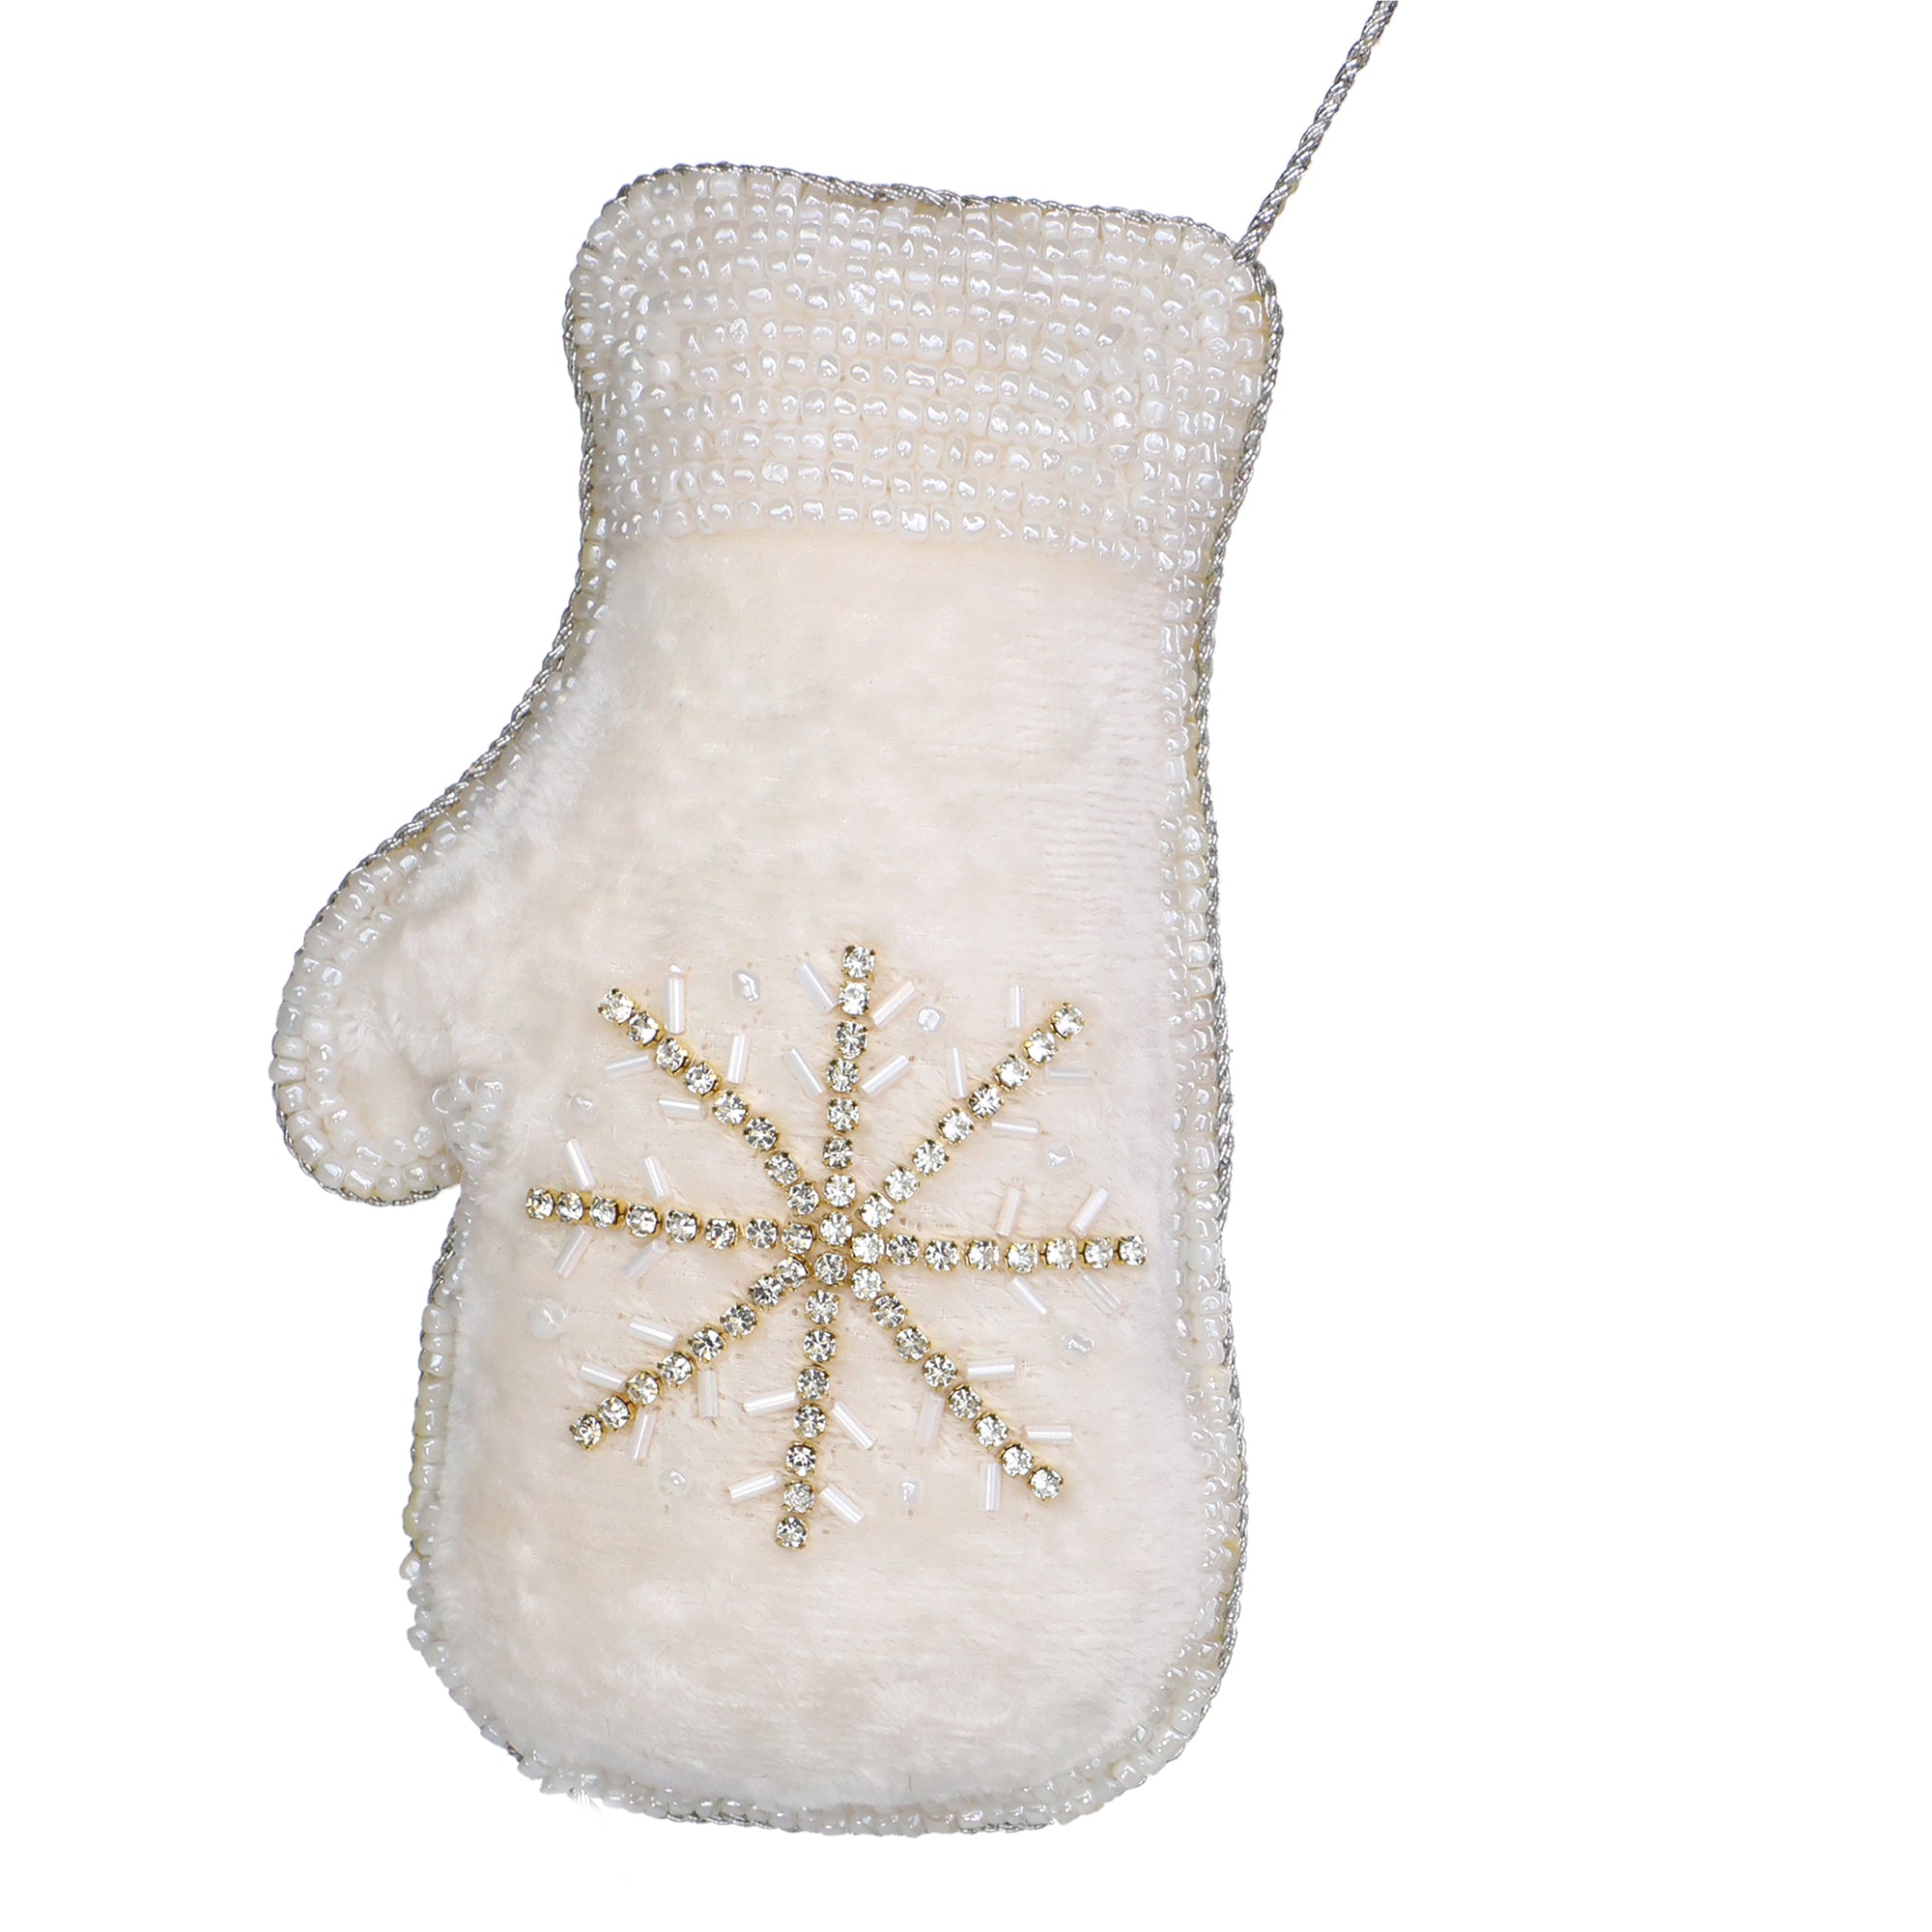 Sugar & Spice Bead Embroidered Plush Hangings / White, Gold / 6.5"x4" / Set of 2 - trunkin.in